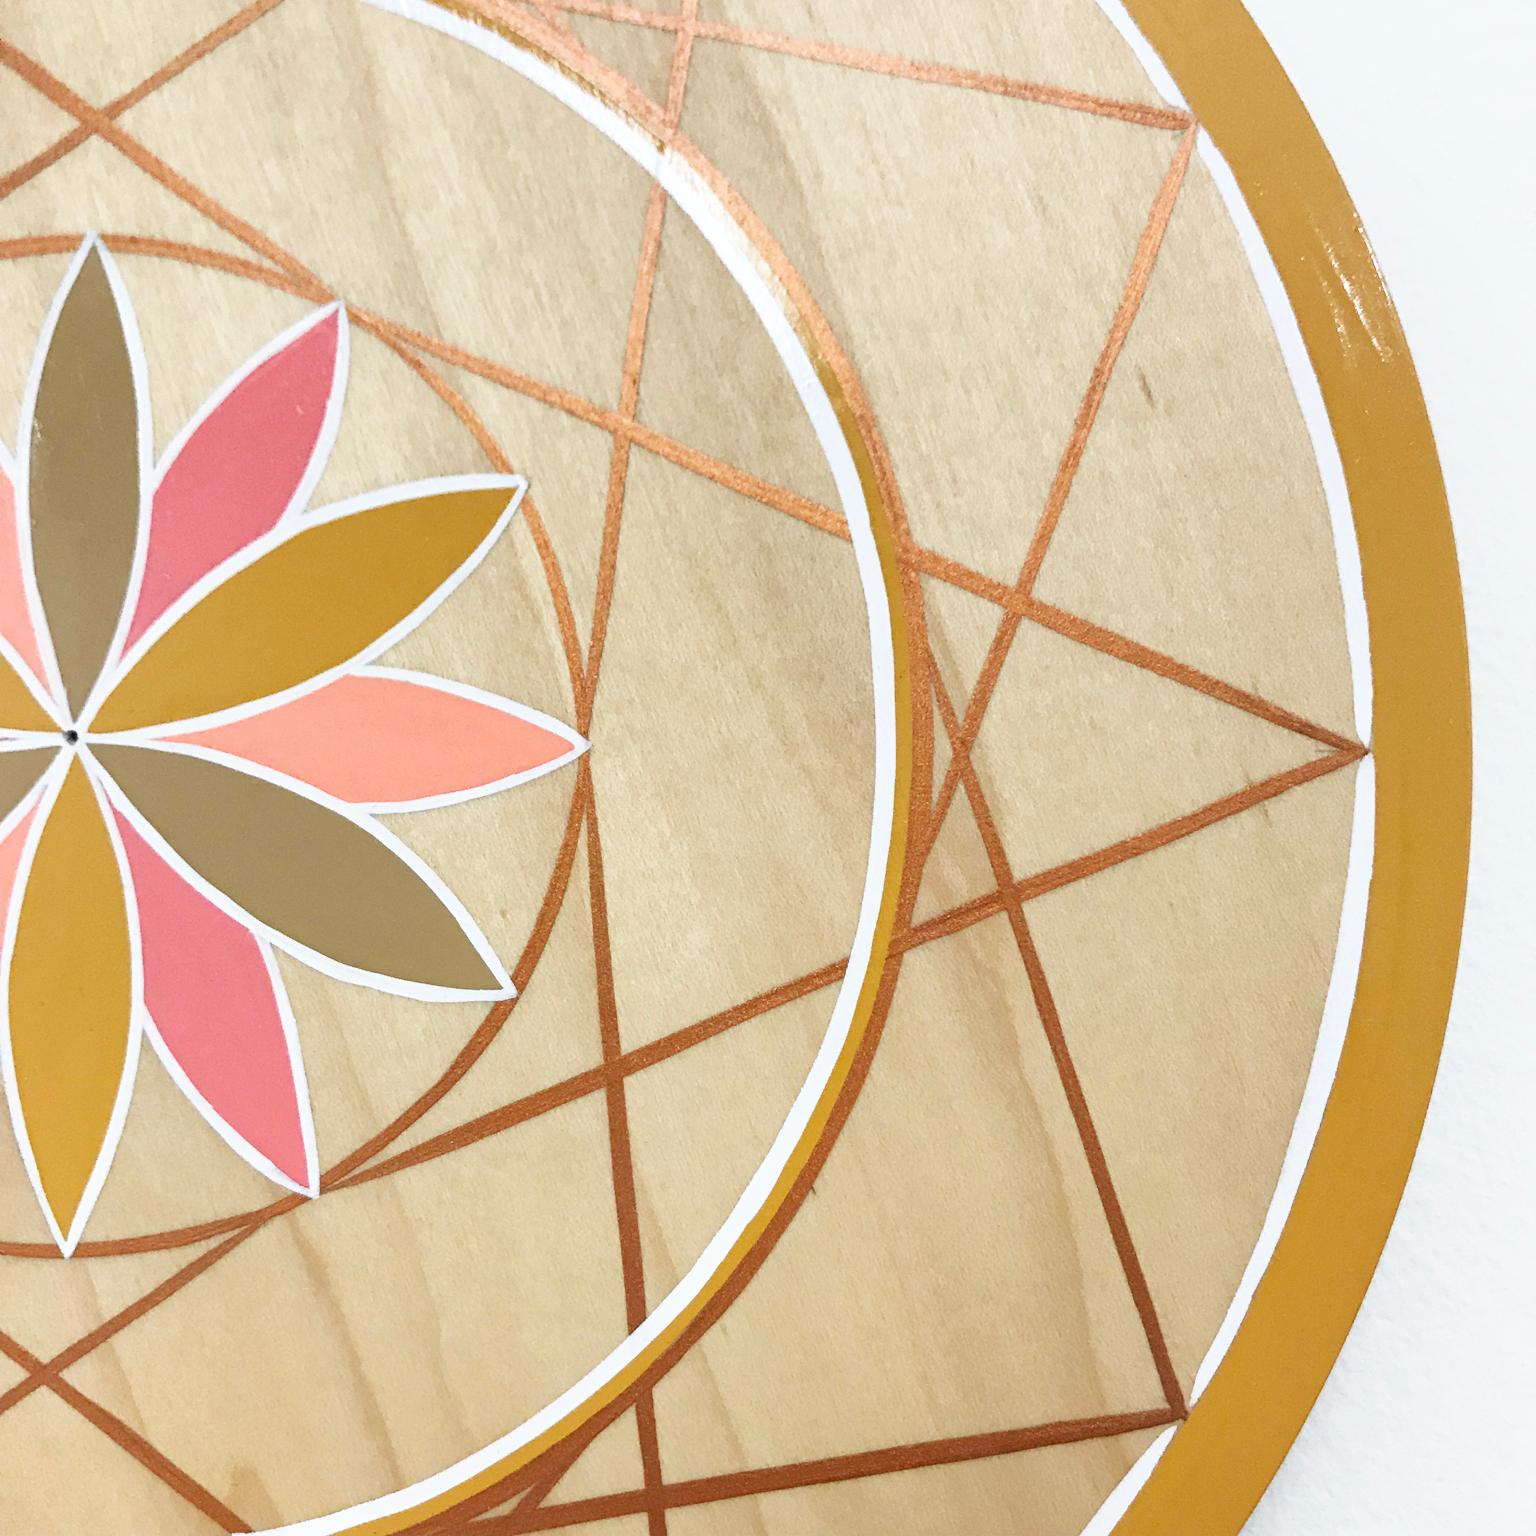 American Hand-Painted Pink and Gold Sacred Geometry Wood Wall Hanging by Scott Chasse For Sale